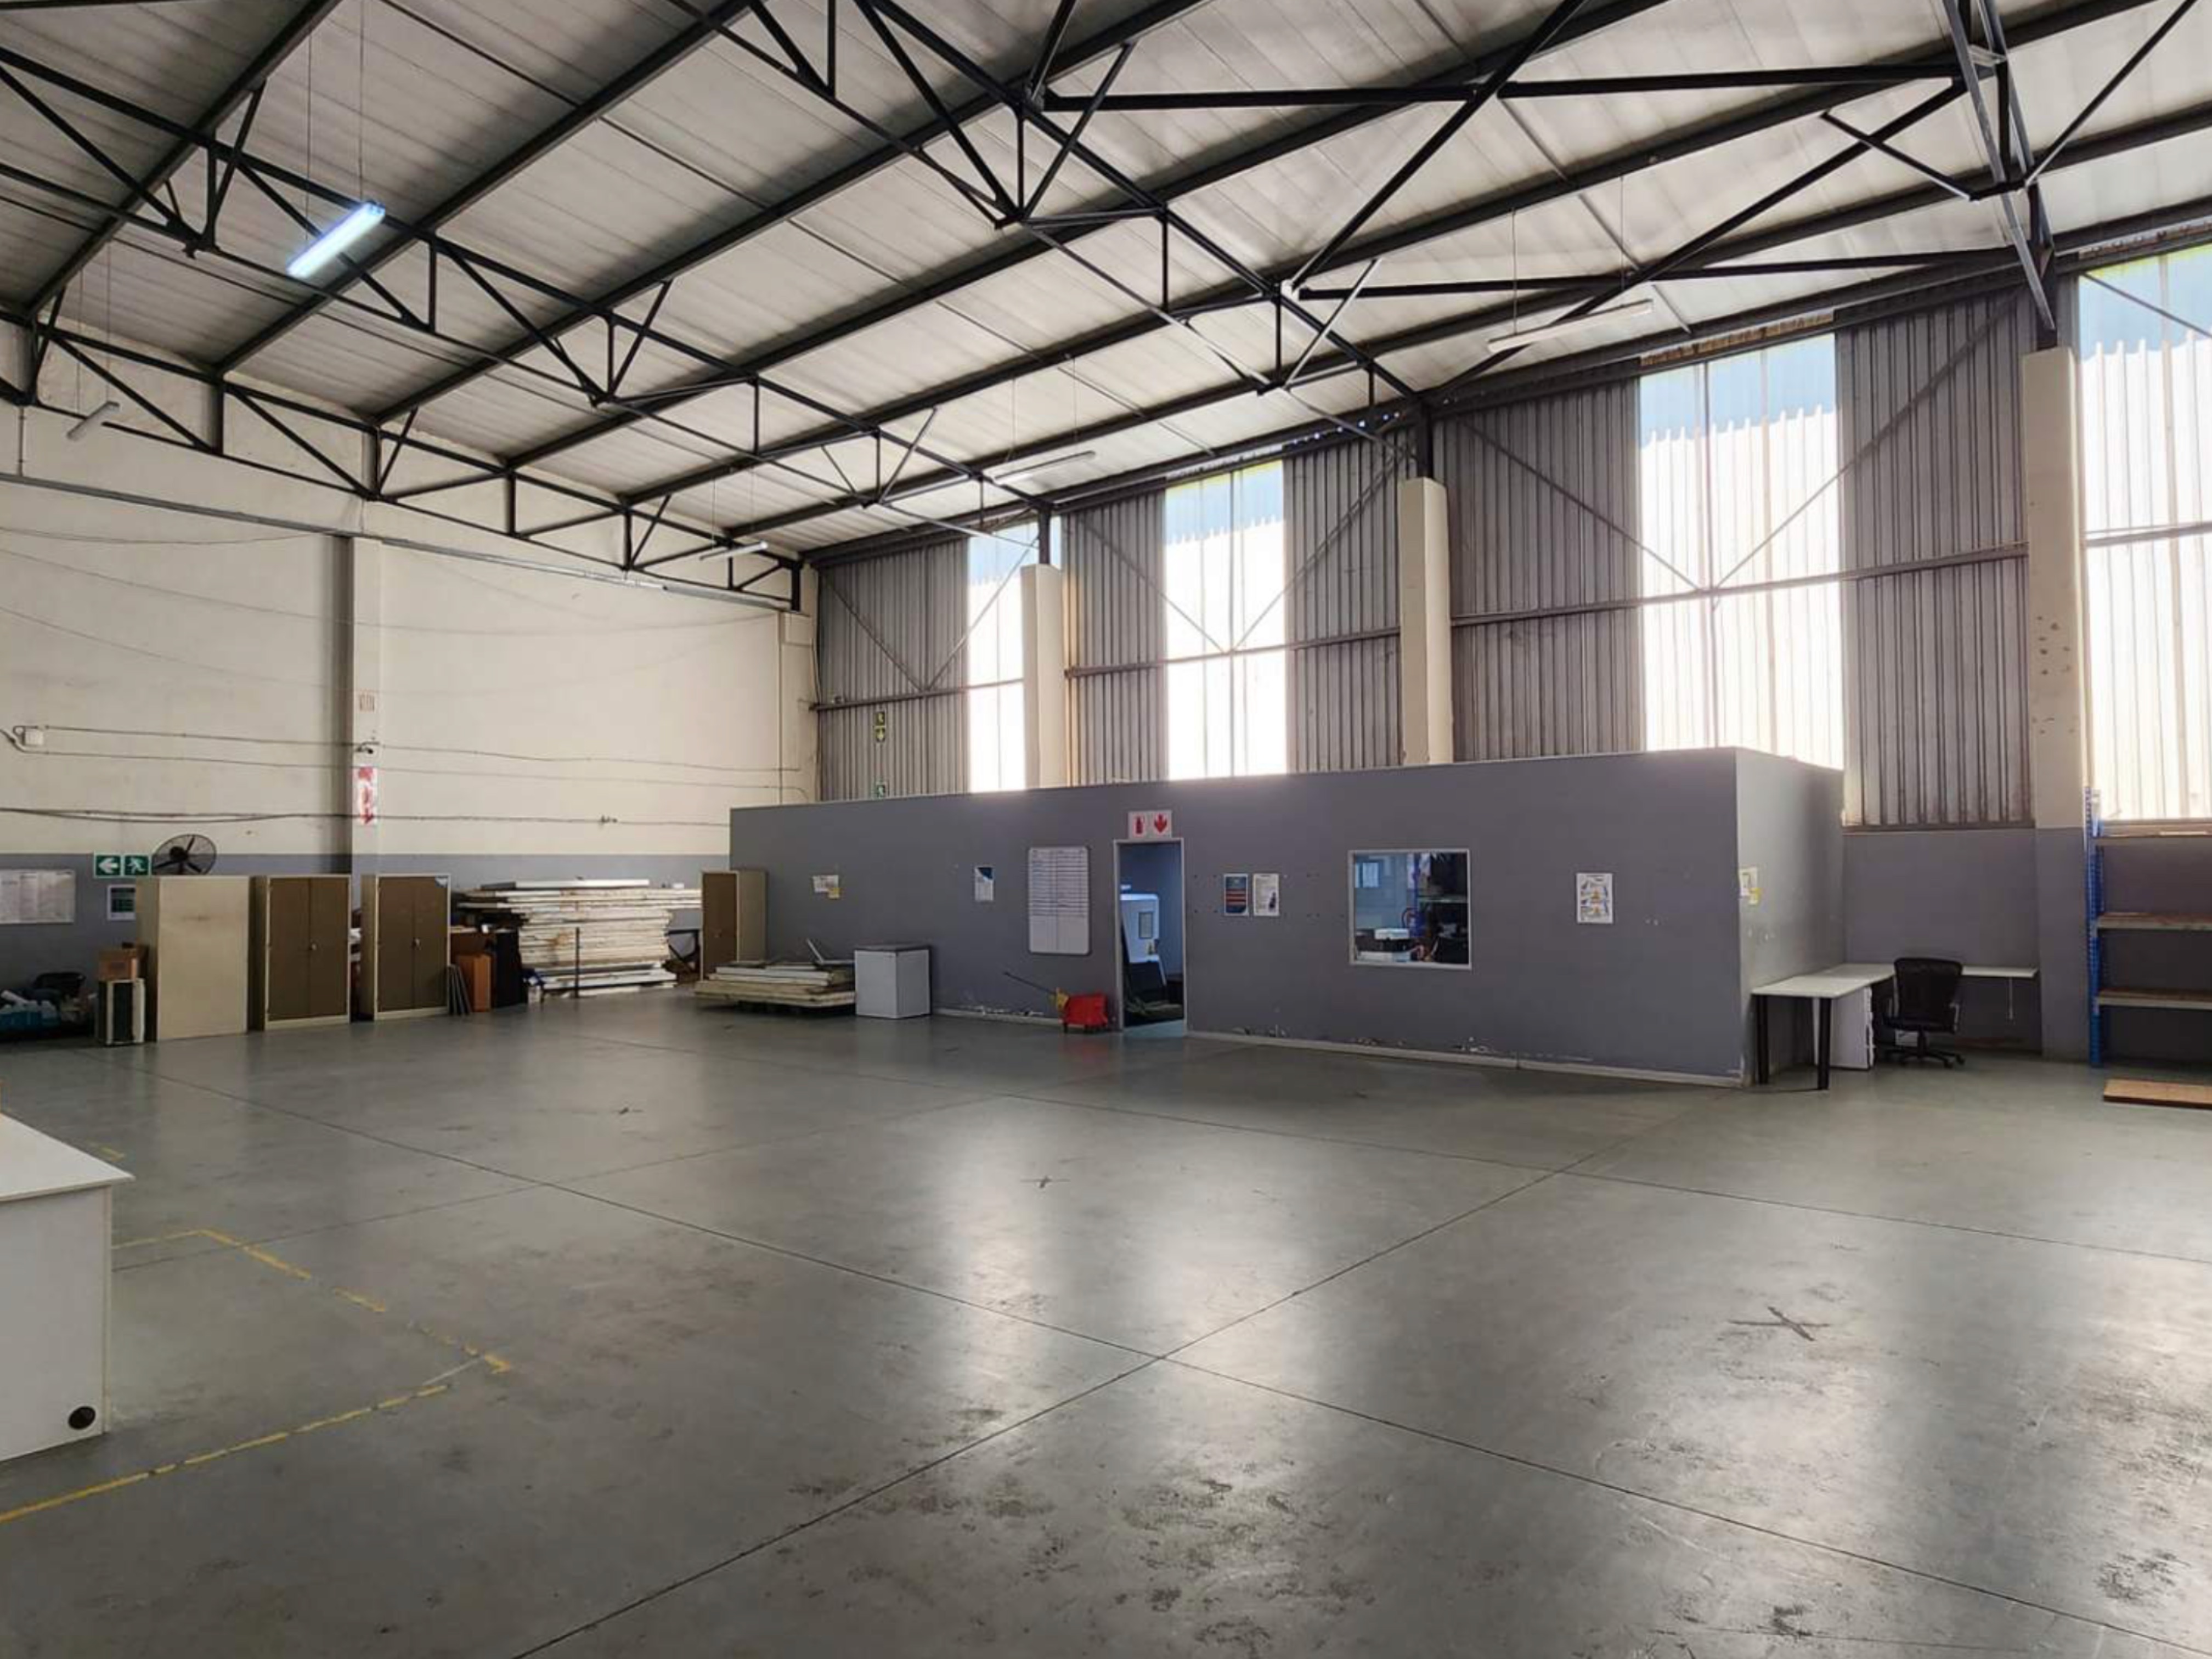 Located in a secure industrial park. This 1008sqm unit offers great opportunity.